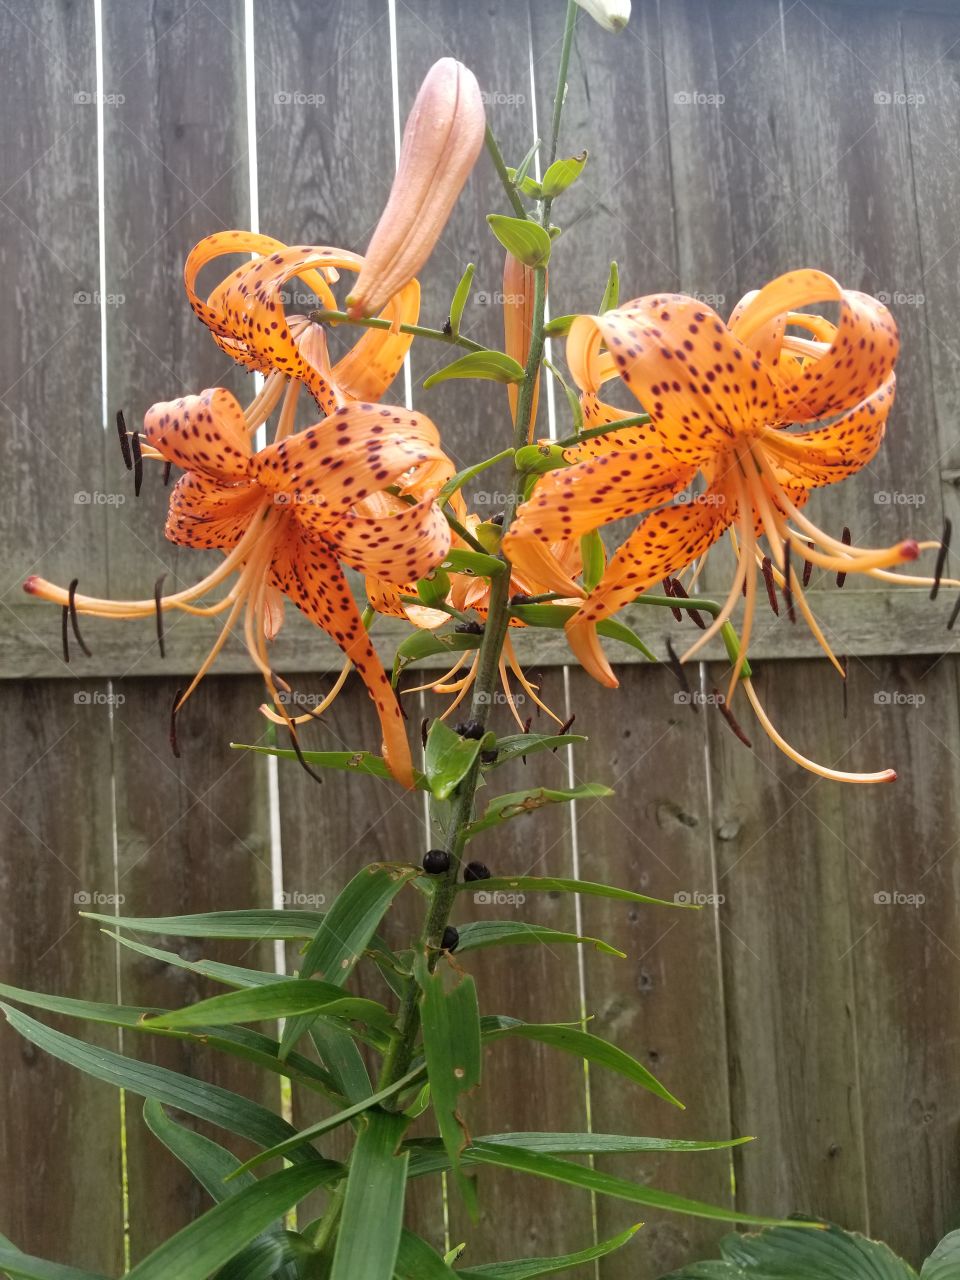 the tiger Lilies